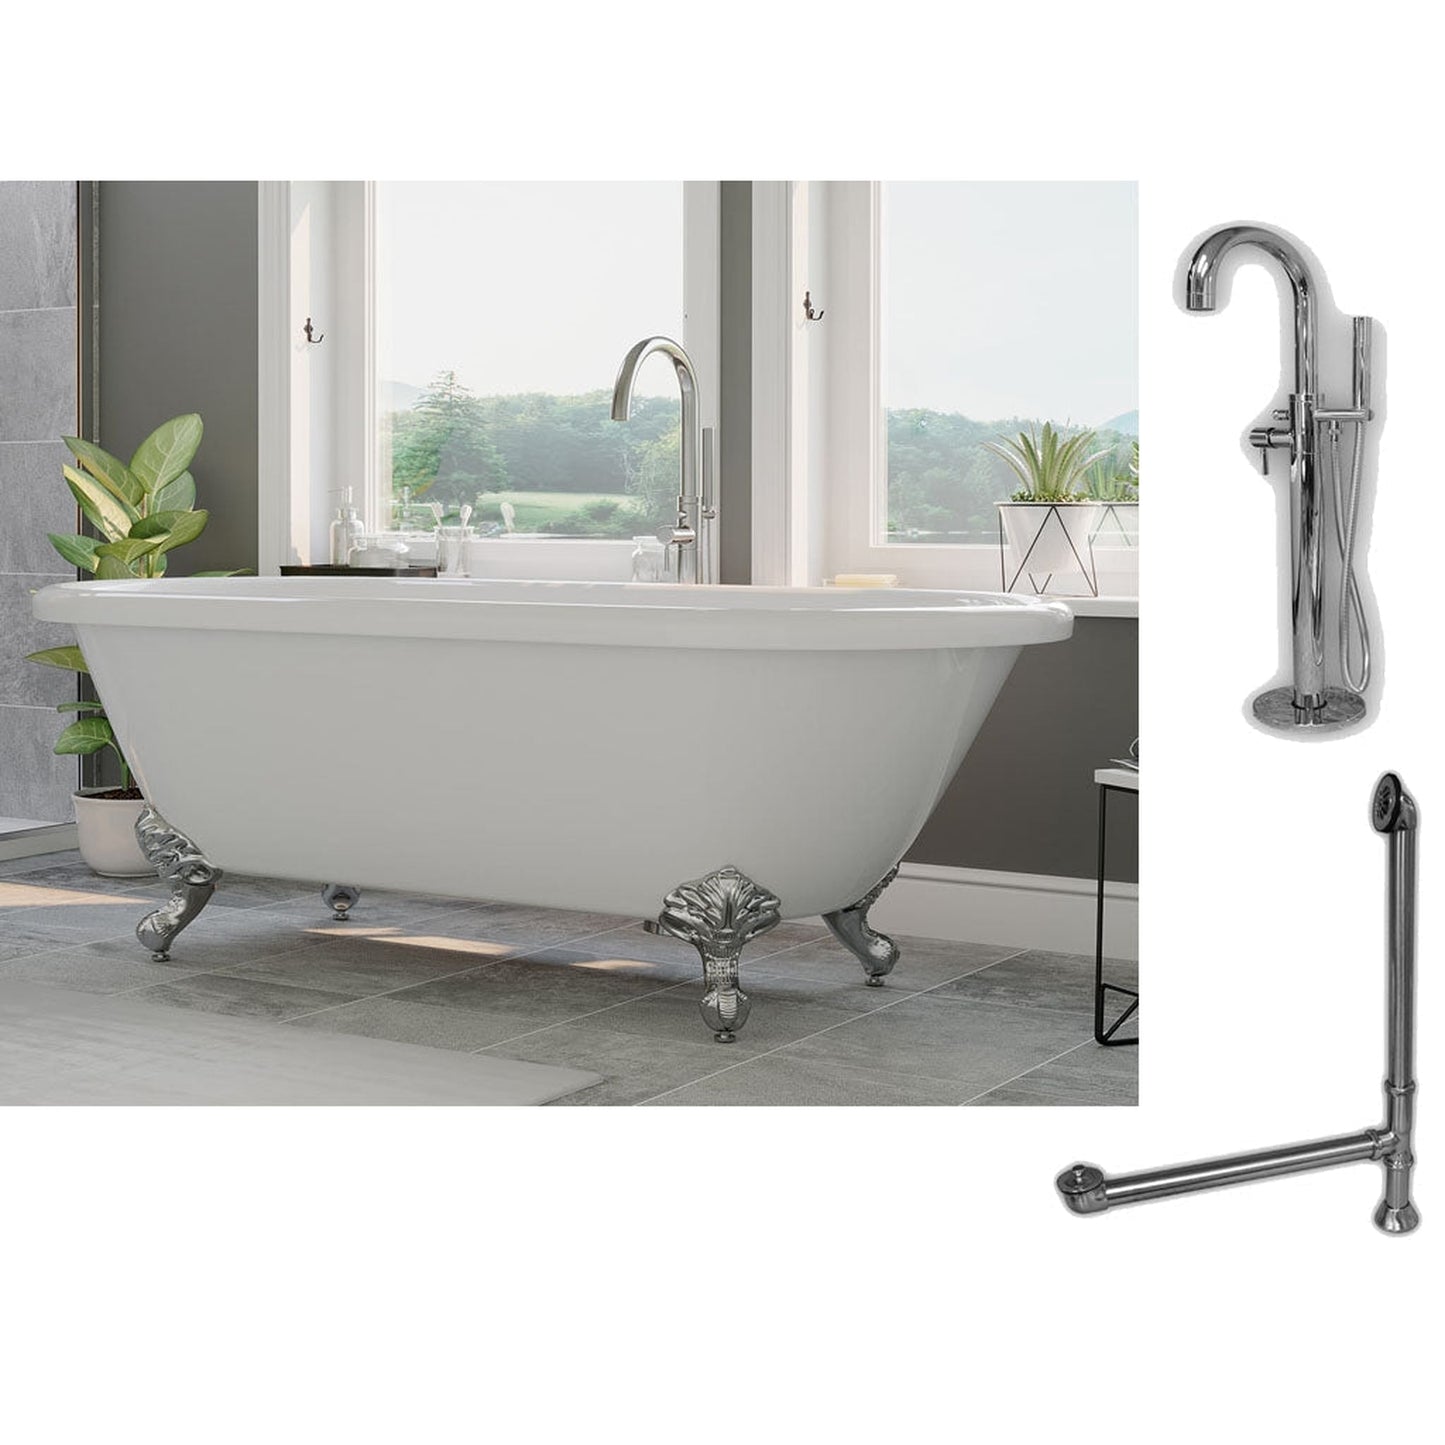 Cambridge Plumbing 70" White Acrylic Double Ended Clawfoot Bathtub With No Deck Holes And Complete Plumbing Package Including Modern Floor Mounted Faucet, Drain And Overflow Assembly In Polished Chrome